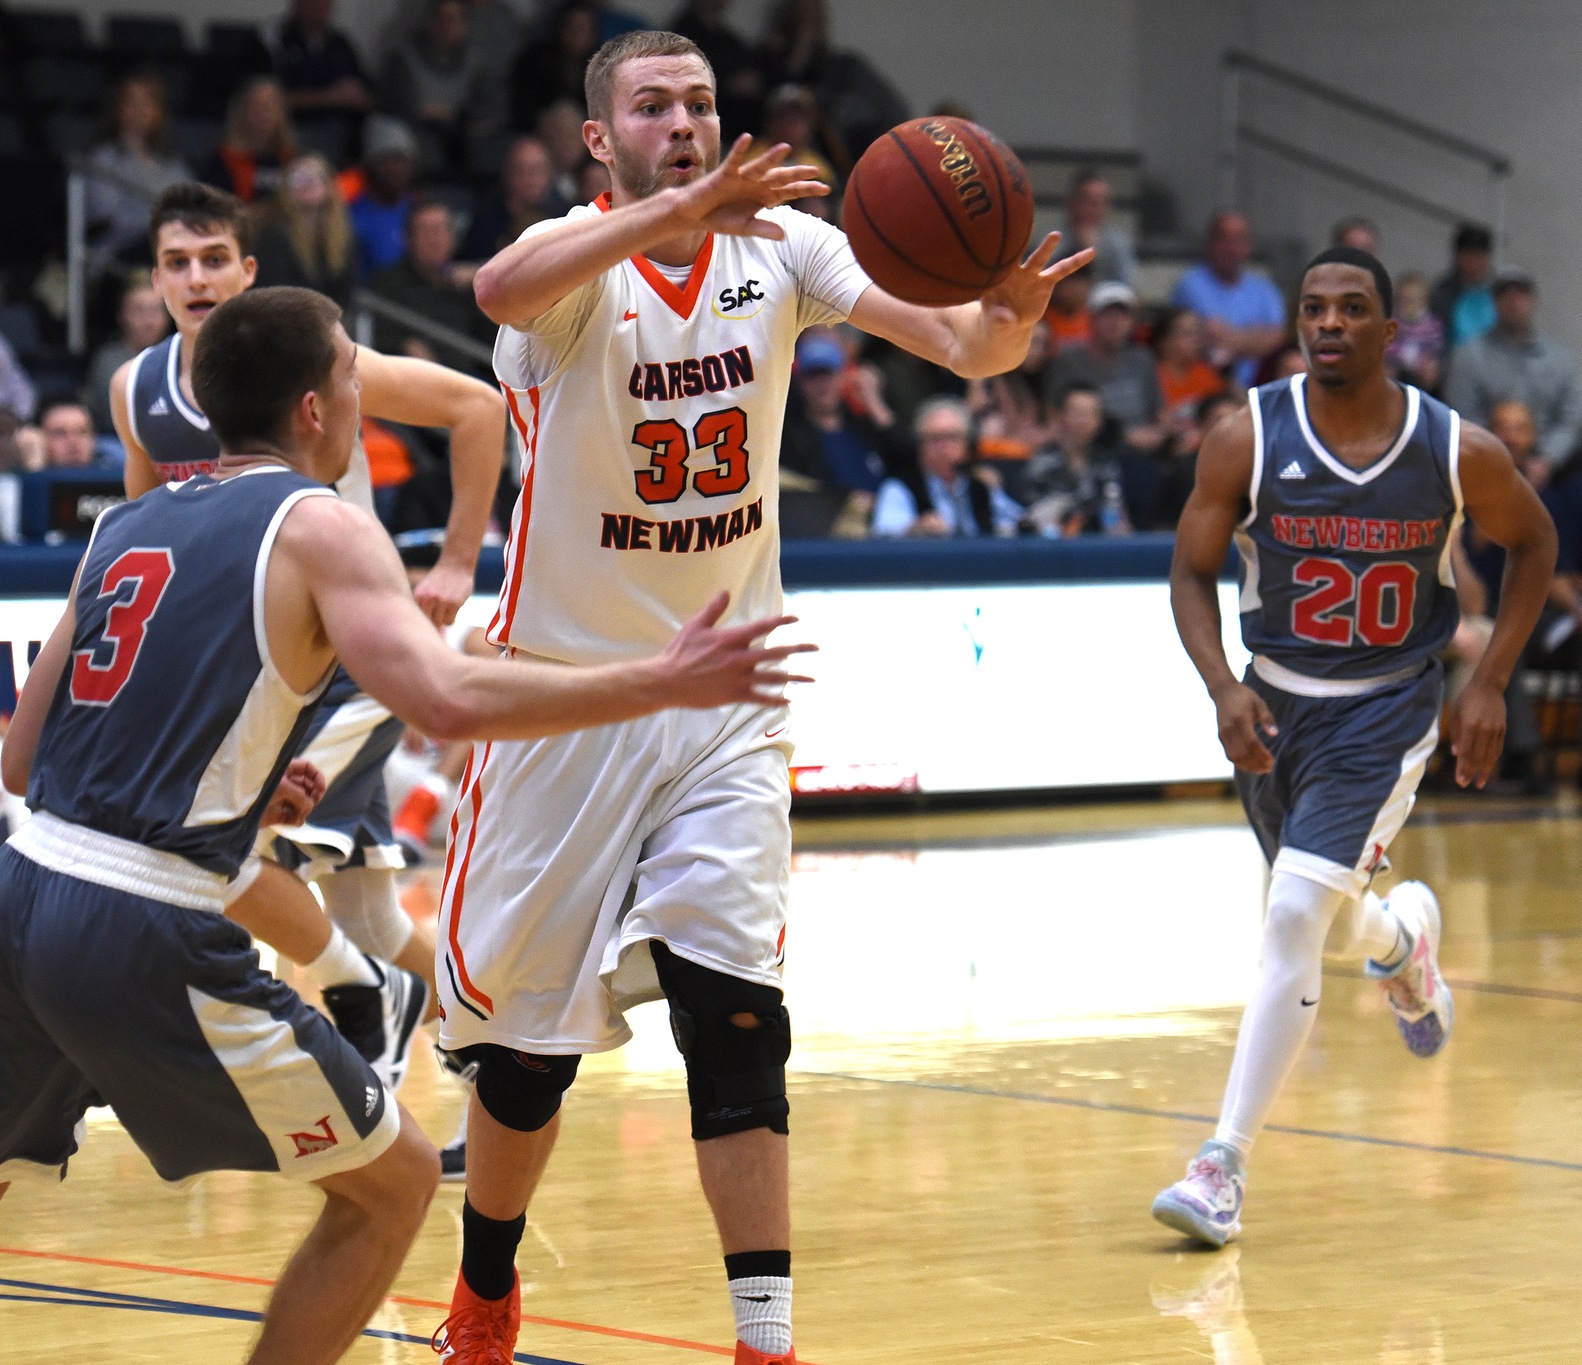 Carson-Newman aims to halt skid with Wednesday night matchup with Mars Hill